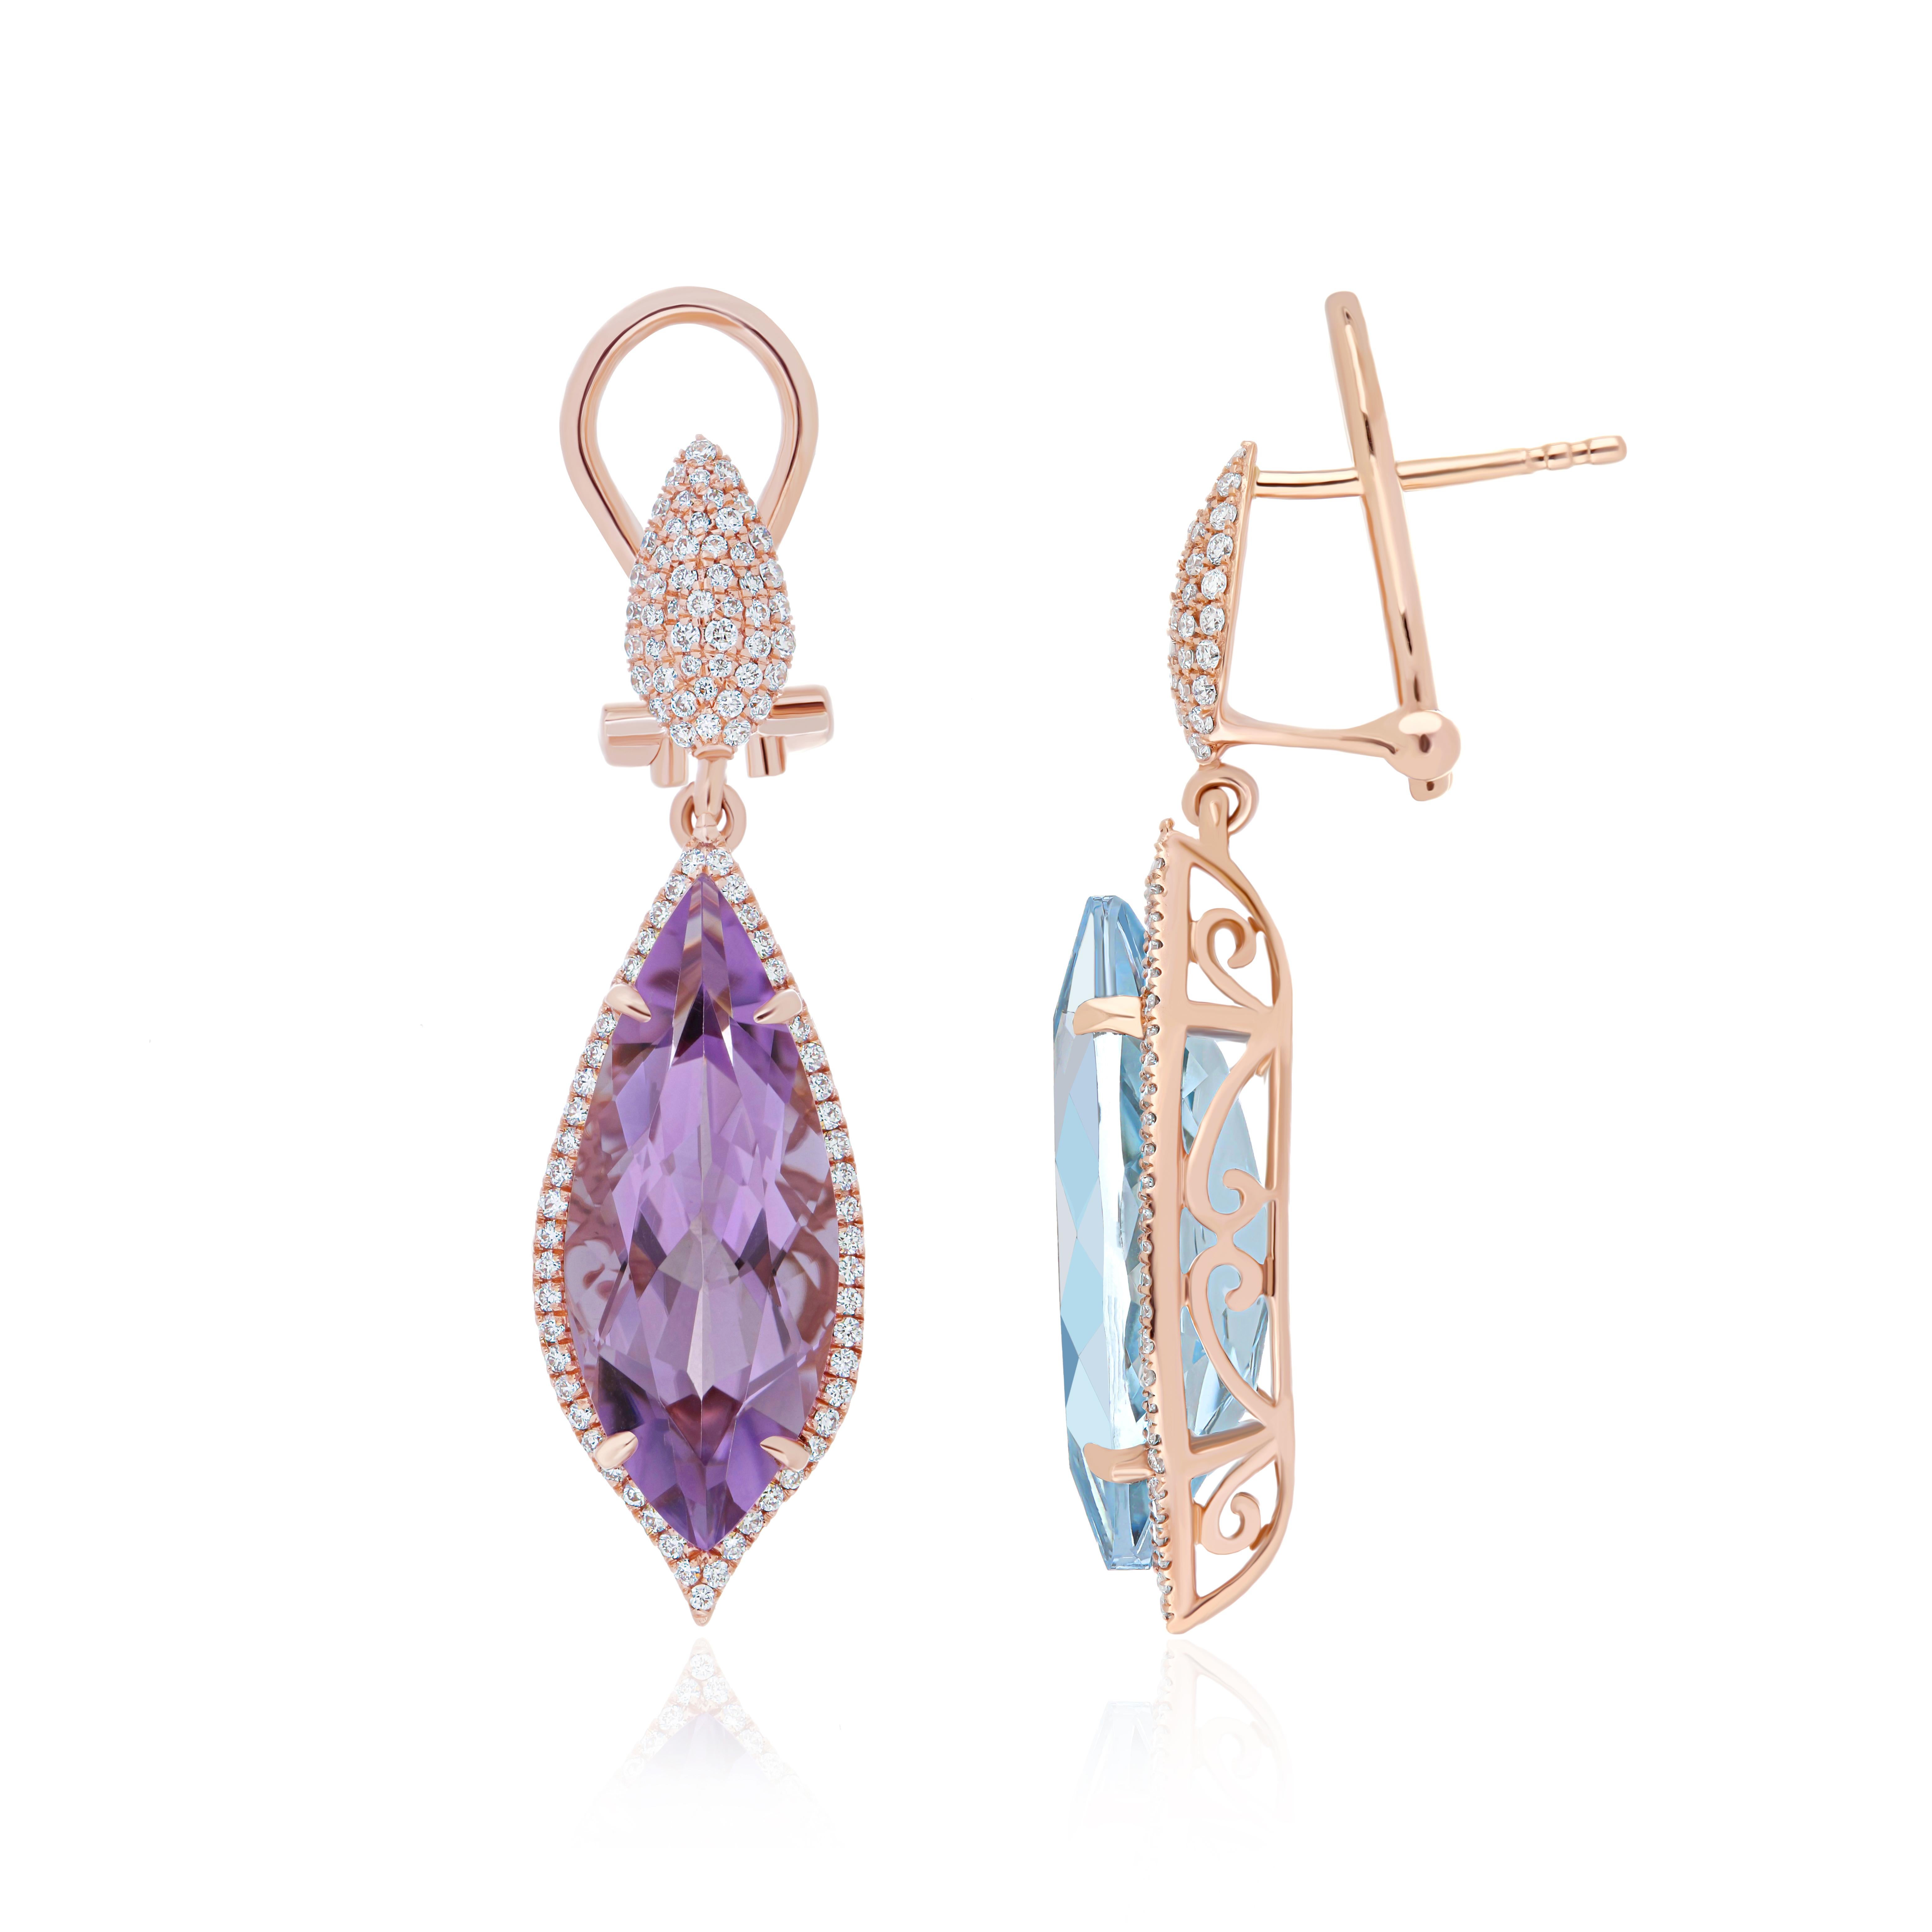 Elegant and Exquisitely Detailed Mis-matched pair of 14Karat Rose Gold Earring set with and Pear Marquise Shape Pink Amethyst weighing approx. 4.50Cts & Pear Marquise Shape Sky Blue Topaz weighing approx. 6.40Cts further enhanced by micro prove Set